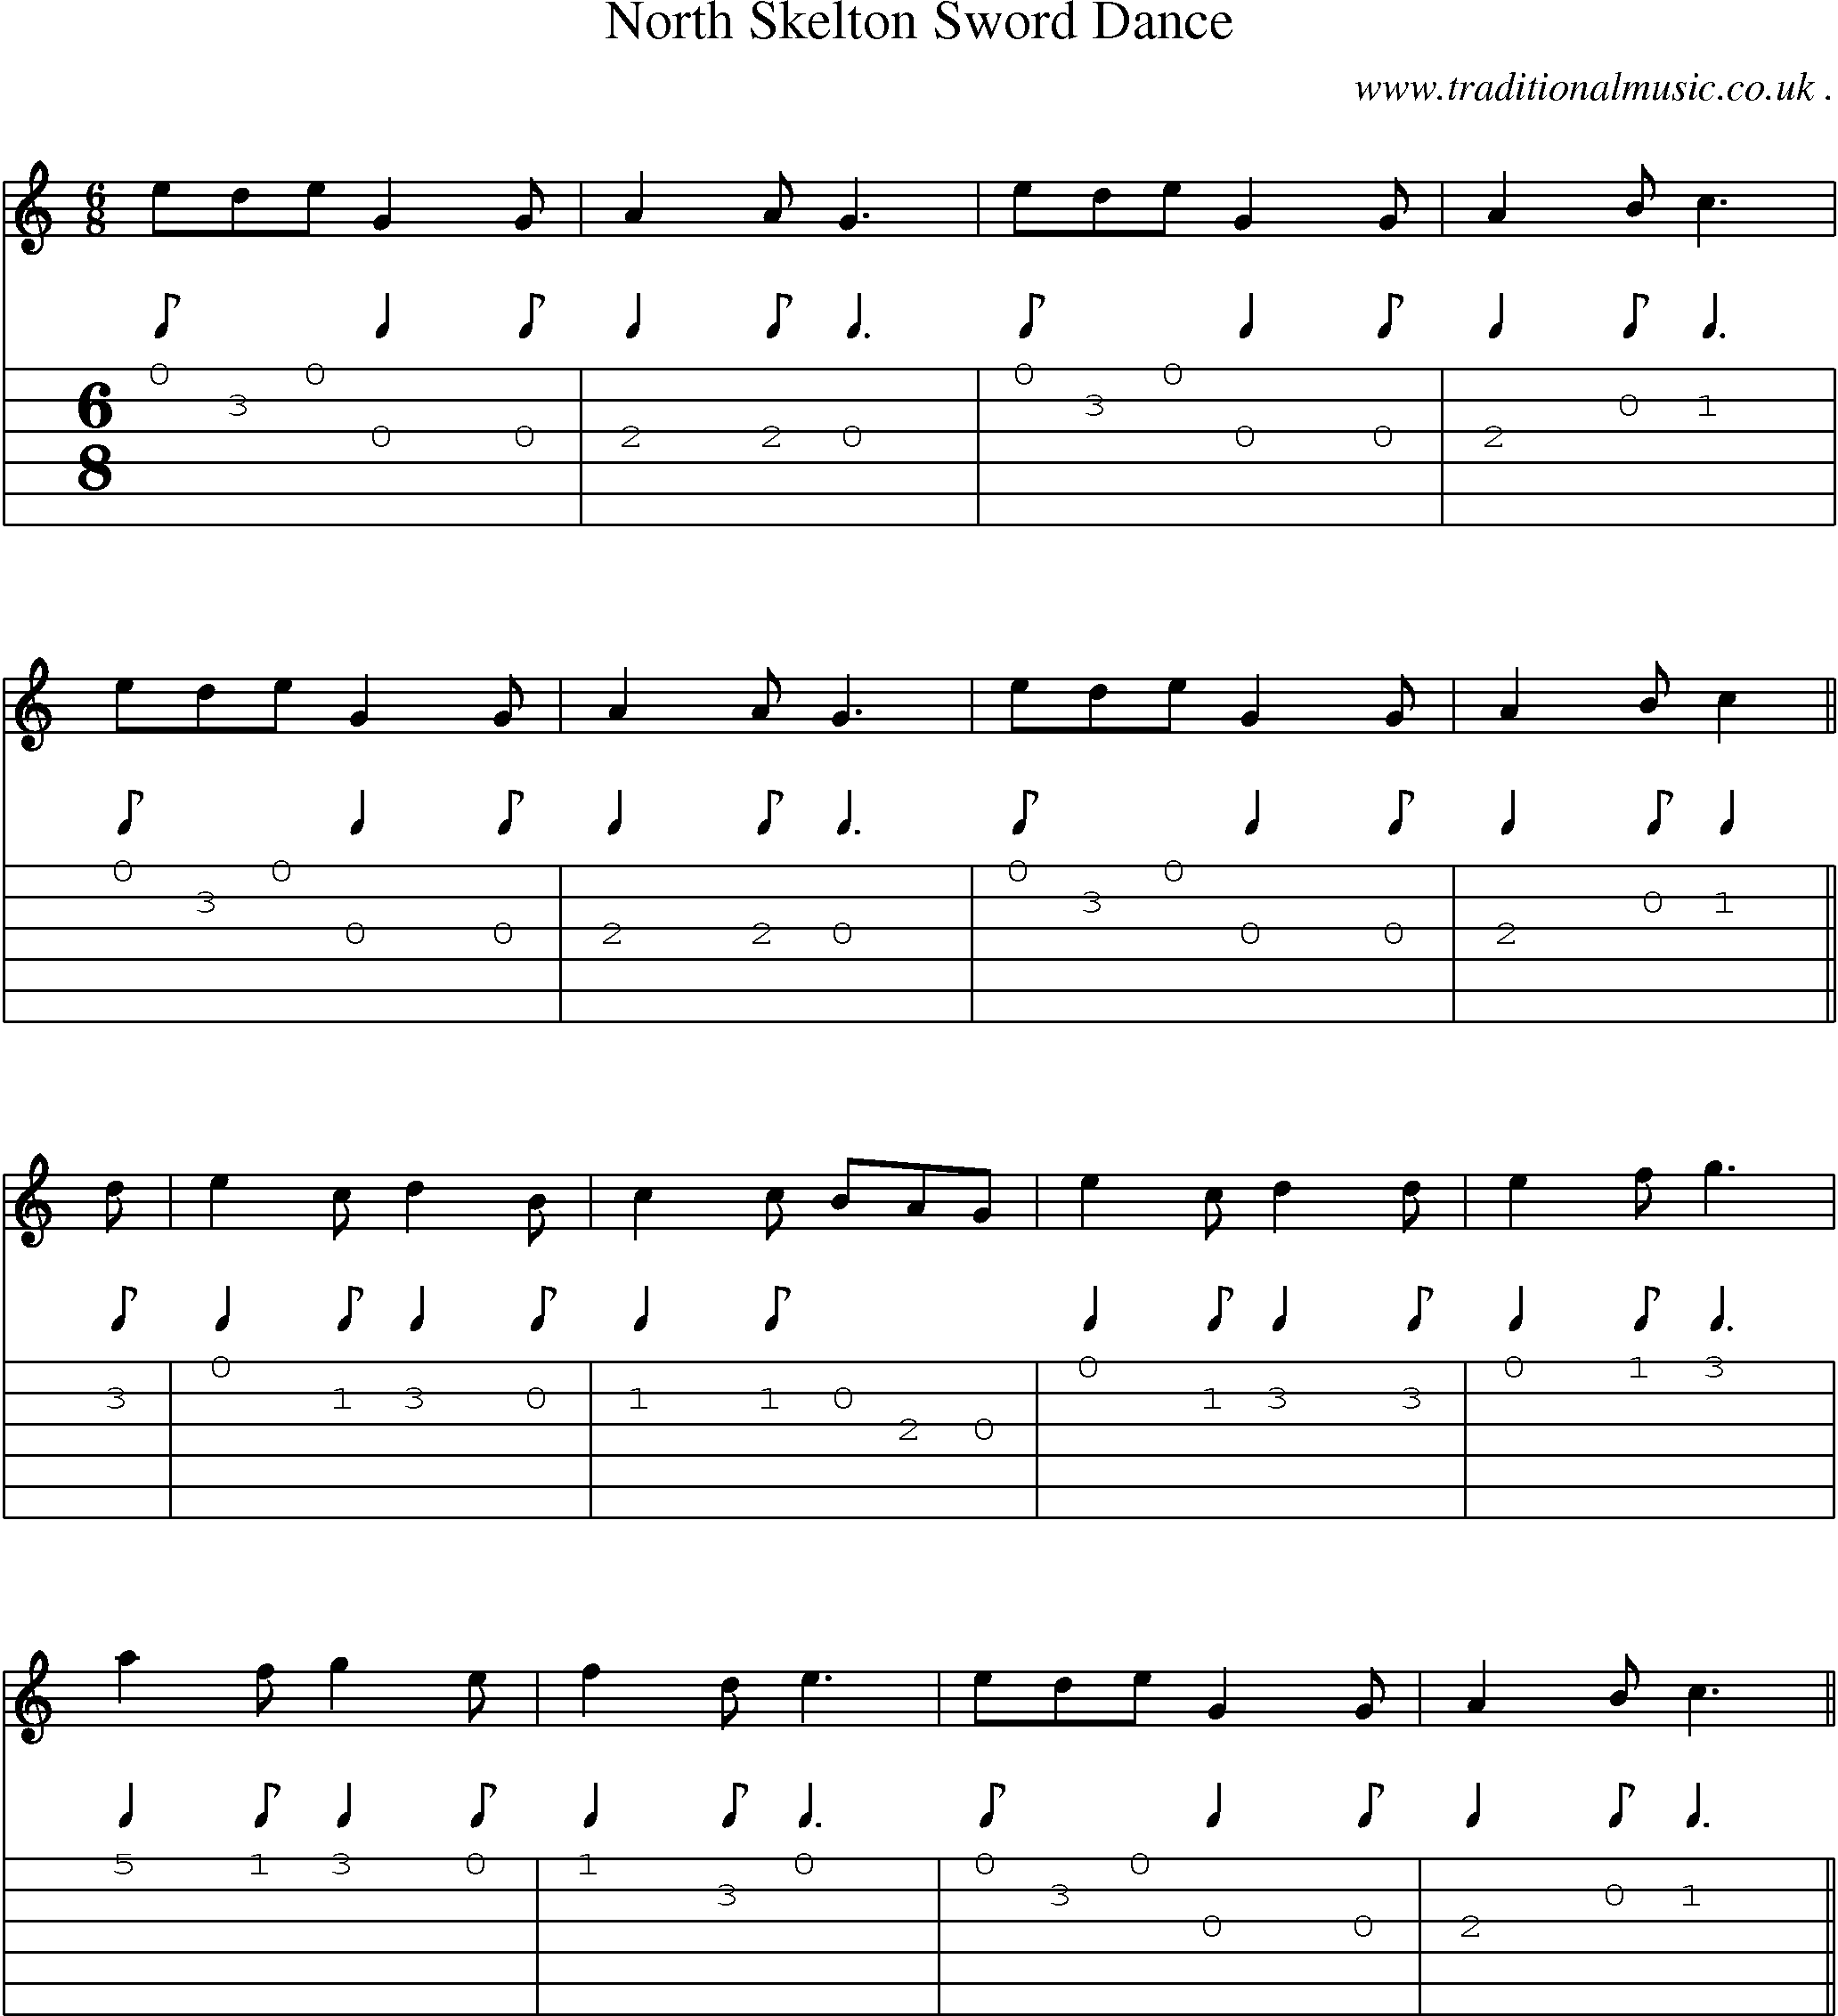 Sheet-Music and Guitar Tabs for North Skelton Sword Dance